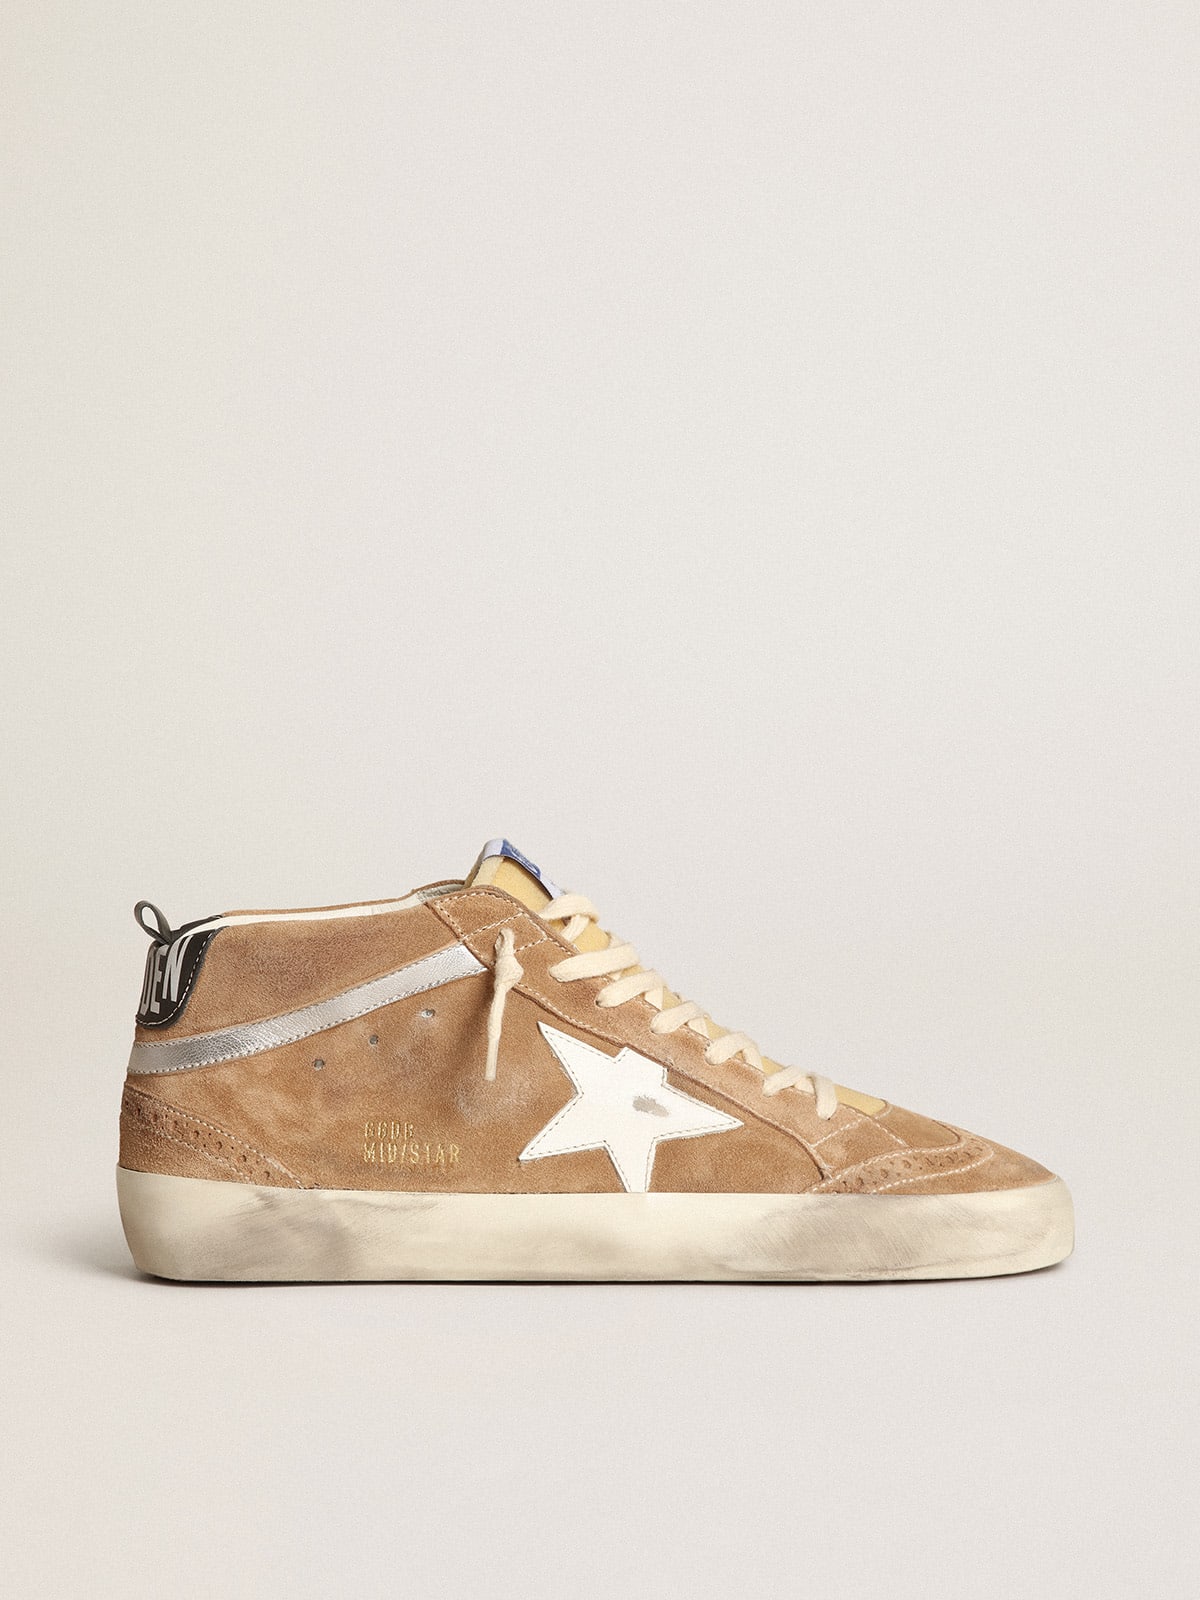 Mid Star sneakers in tobacco-colored suede with white leather star and silver metallic leather flash